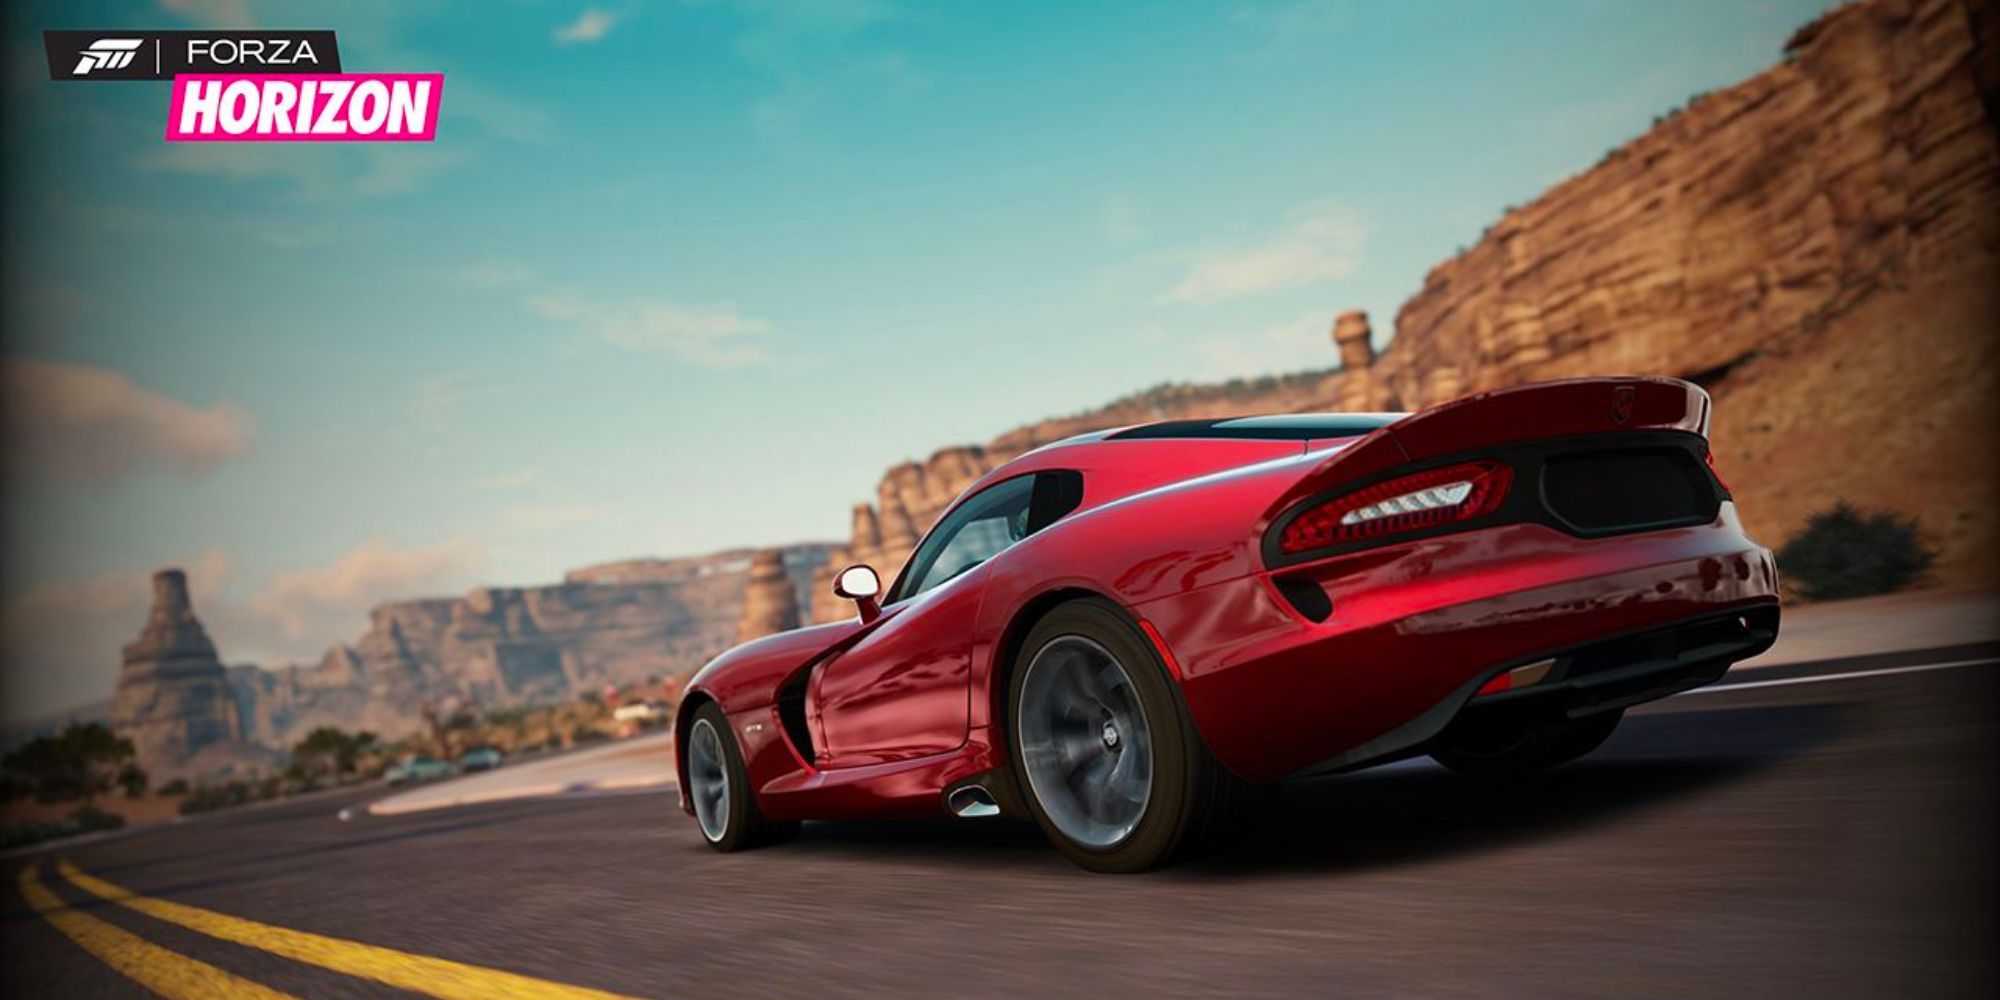 Forza Horizon Red Car on Road